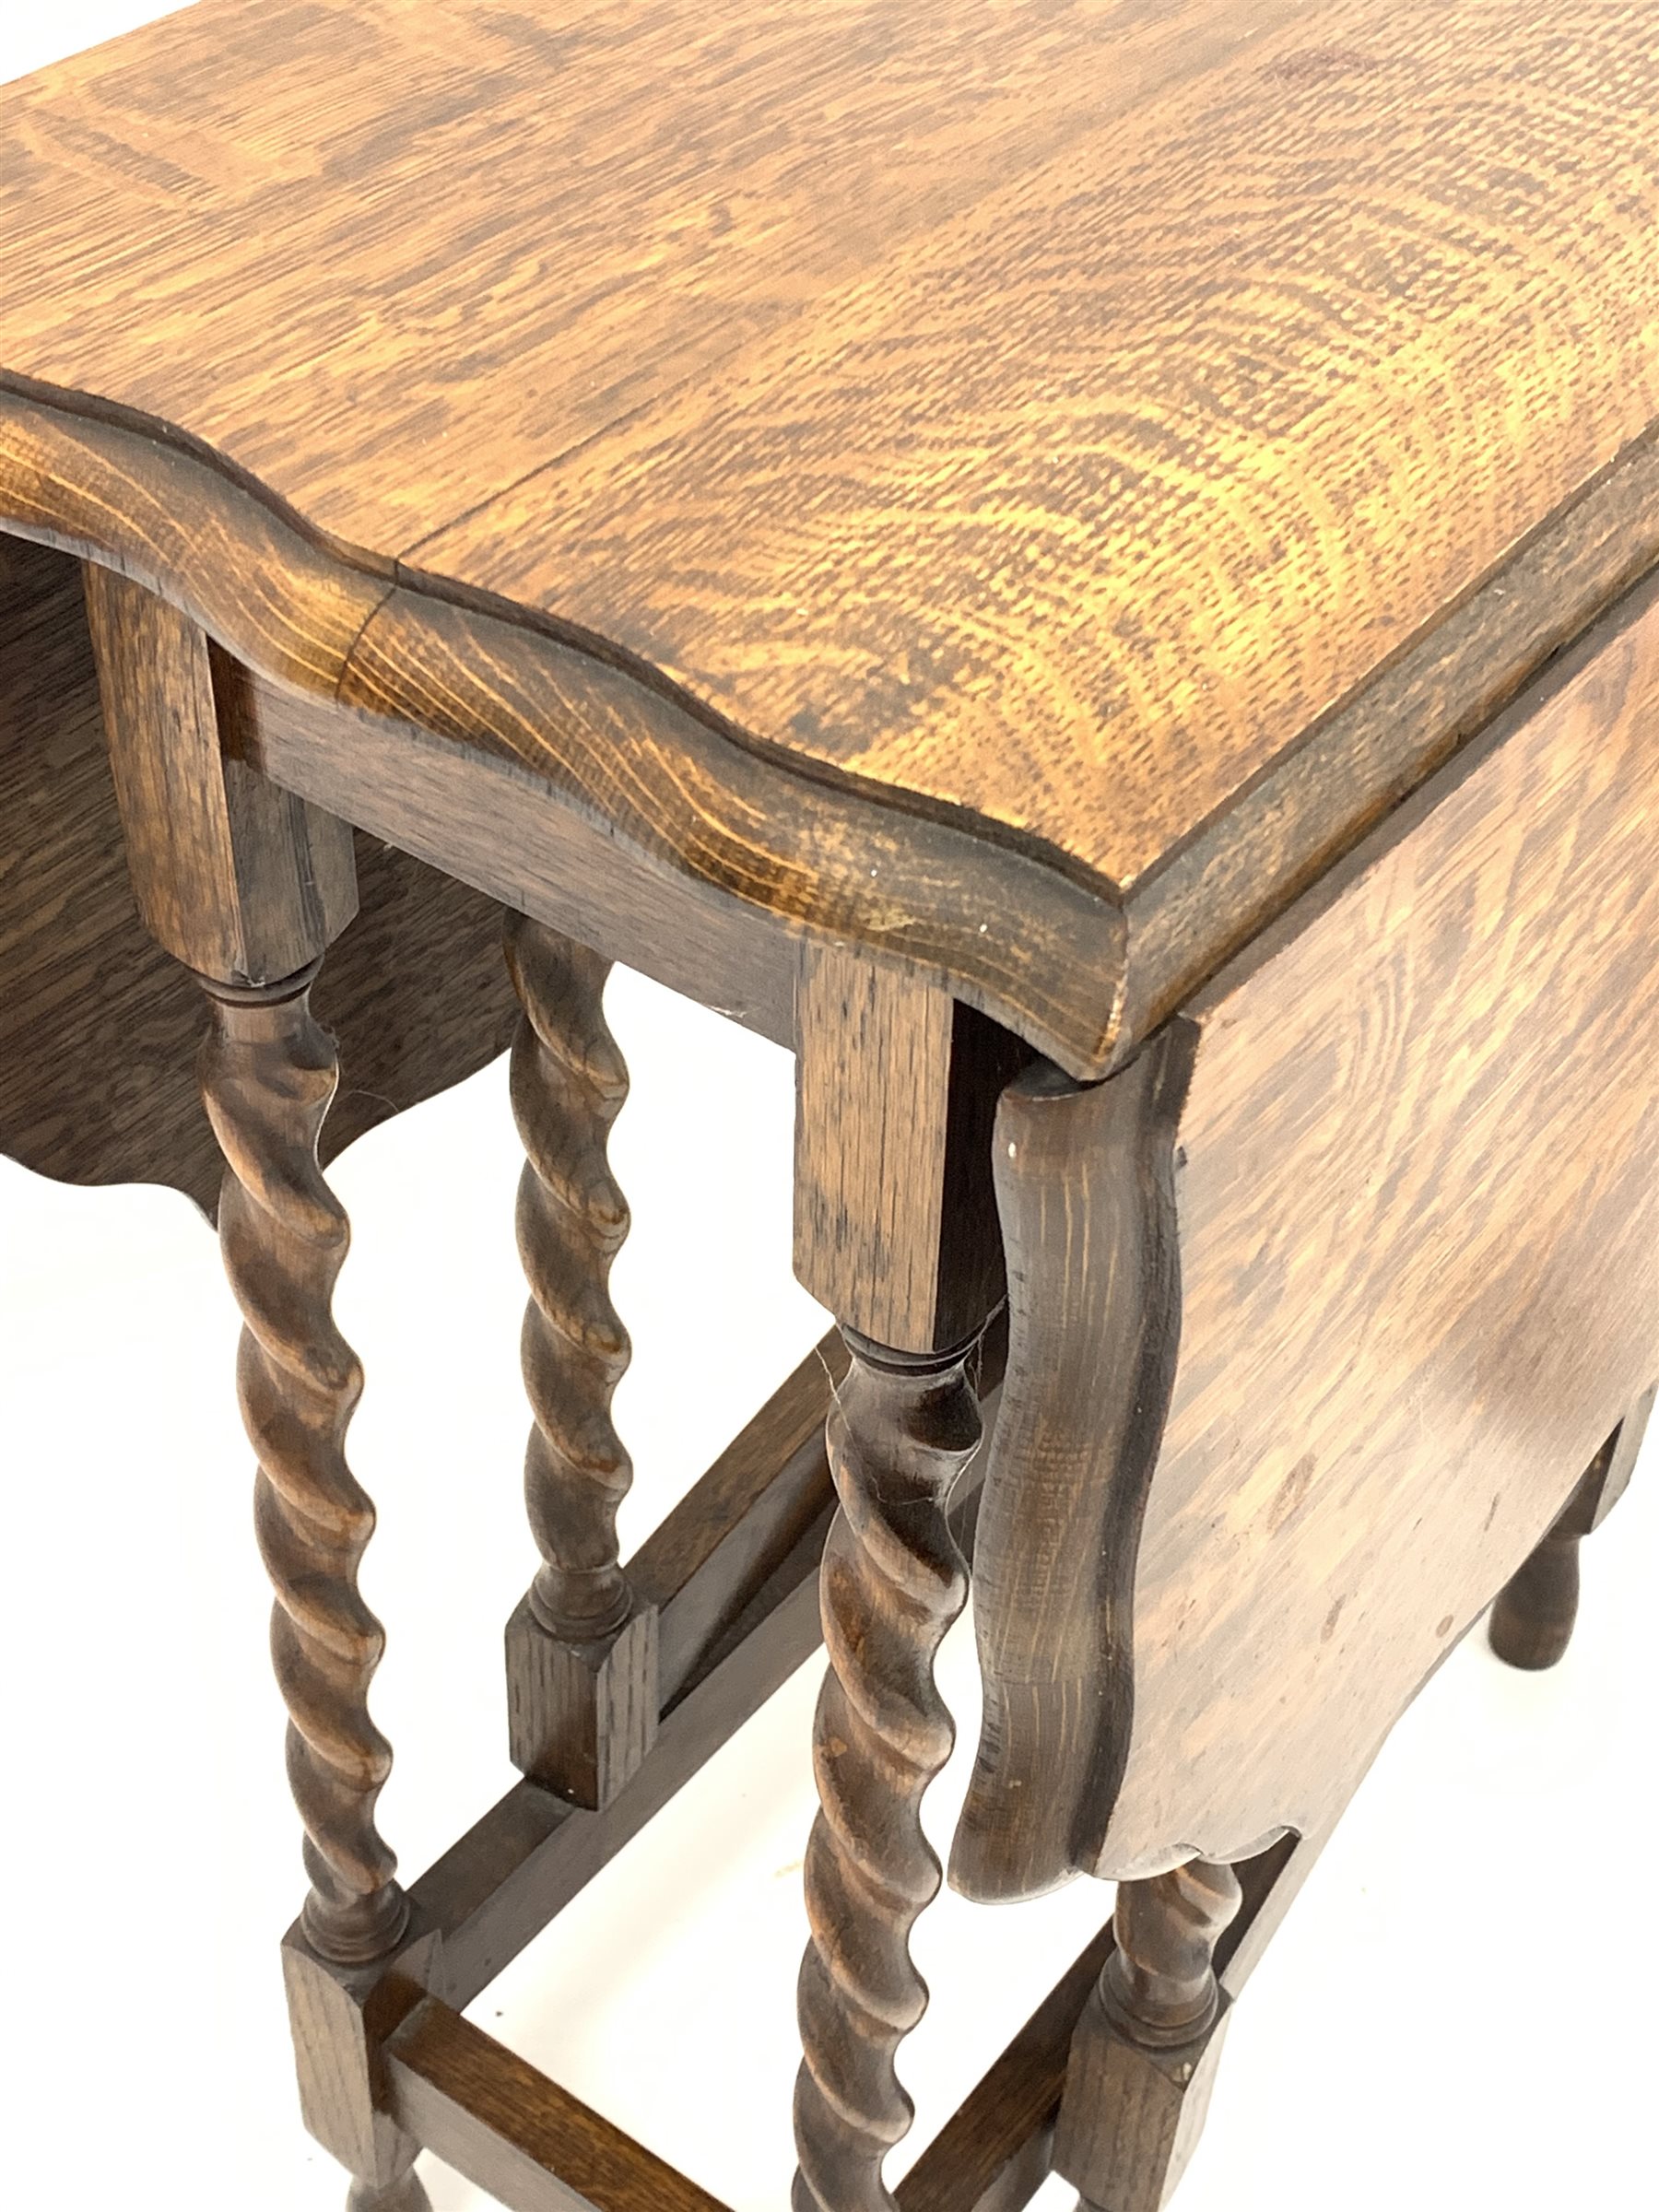 Georgian style mahogany tripod table with pie crust tilt top (D59cm, H70cm), and an early 20th centu - Image 3 of 3